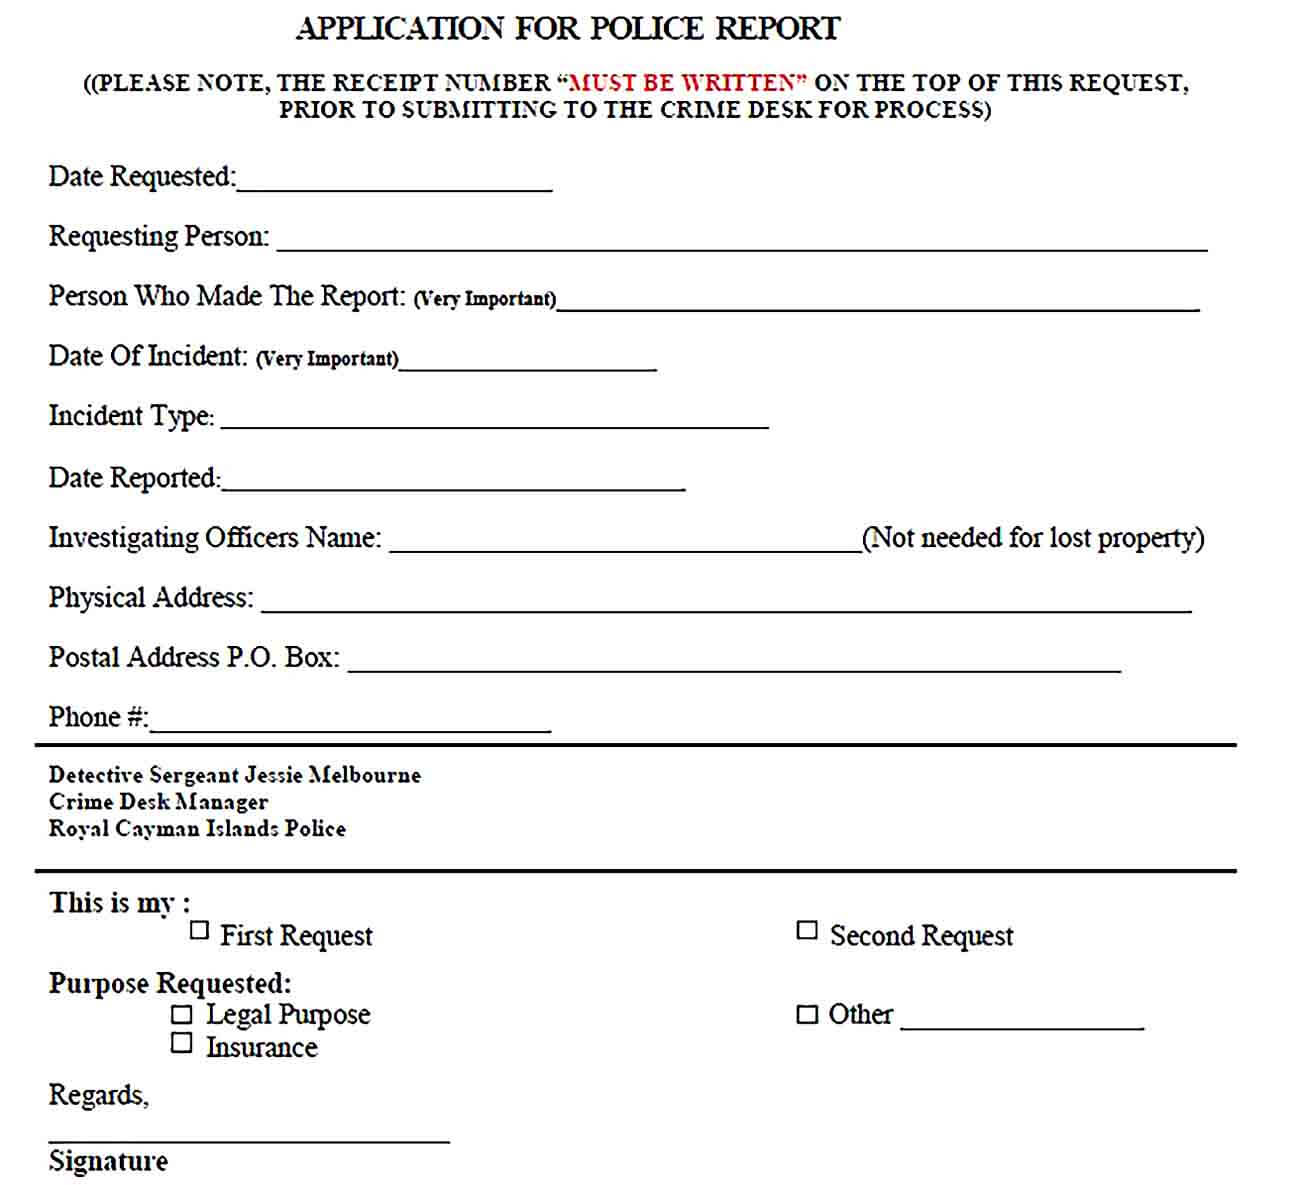 Sample Police Report Application